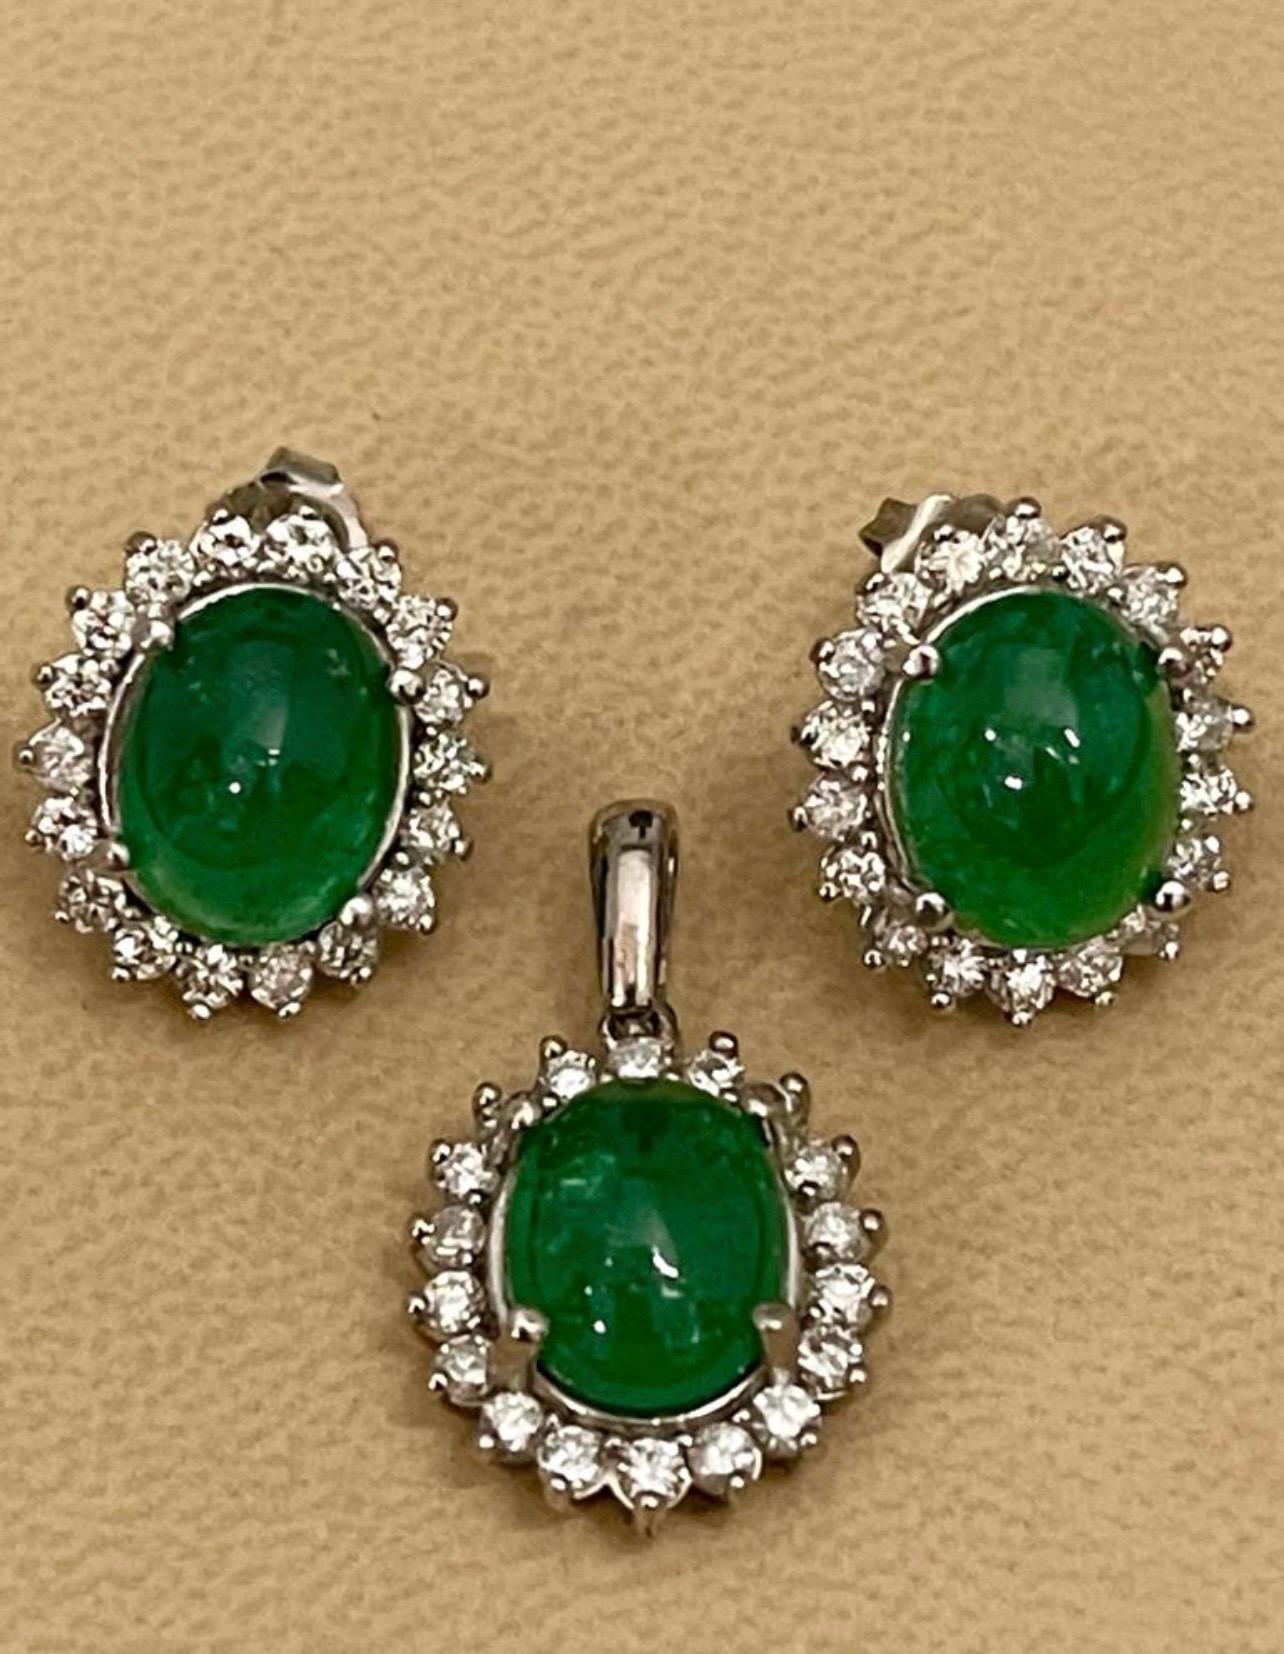 12 Ct Natural Emerald Zambia Cabochon & Diamond Stud Earring 14 Karat White Gold In Excellent Condition For Sale In New York, NY